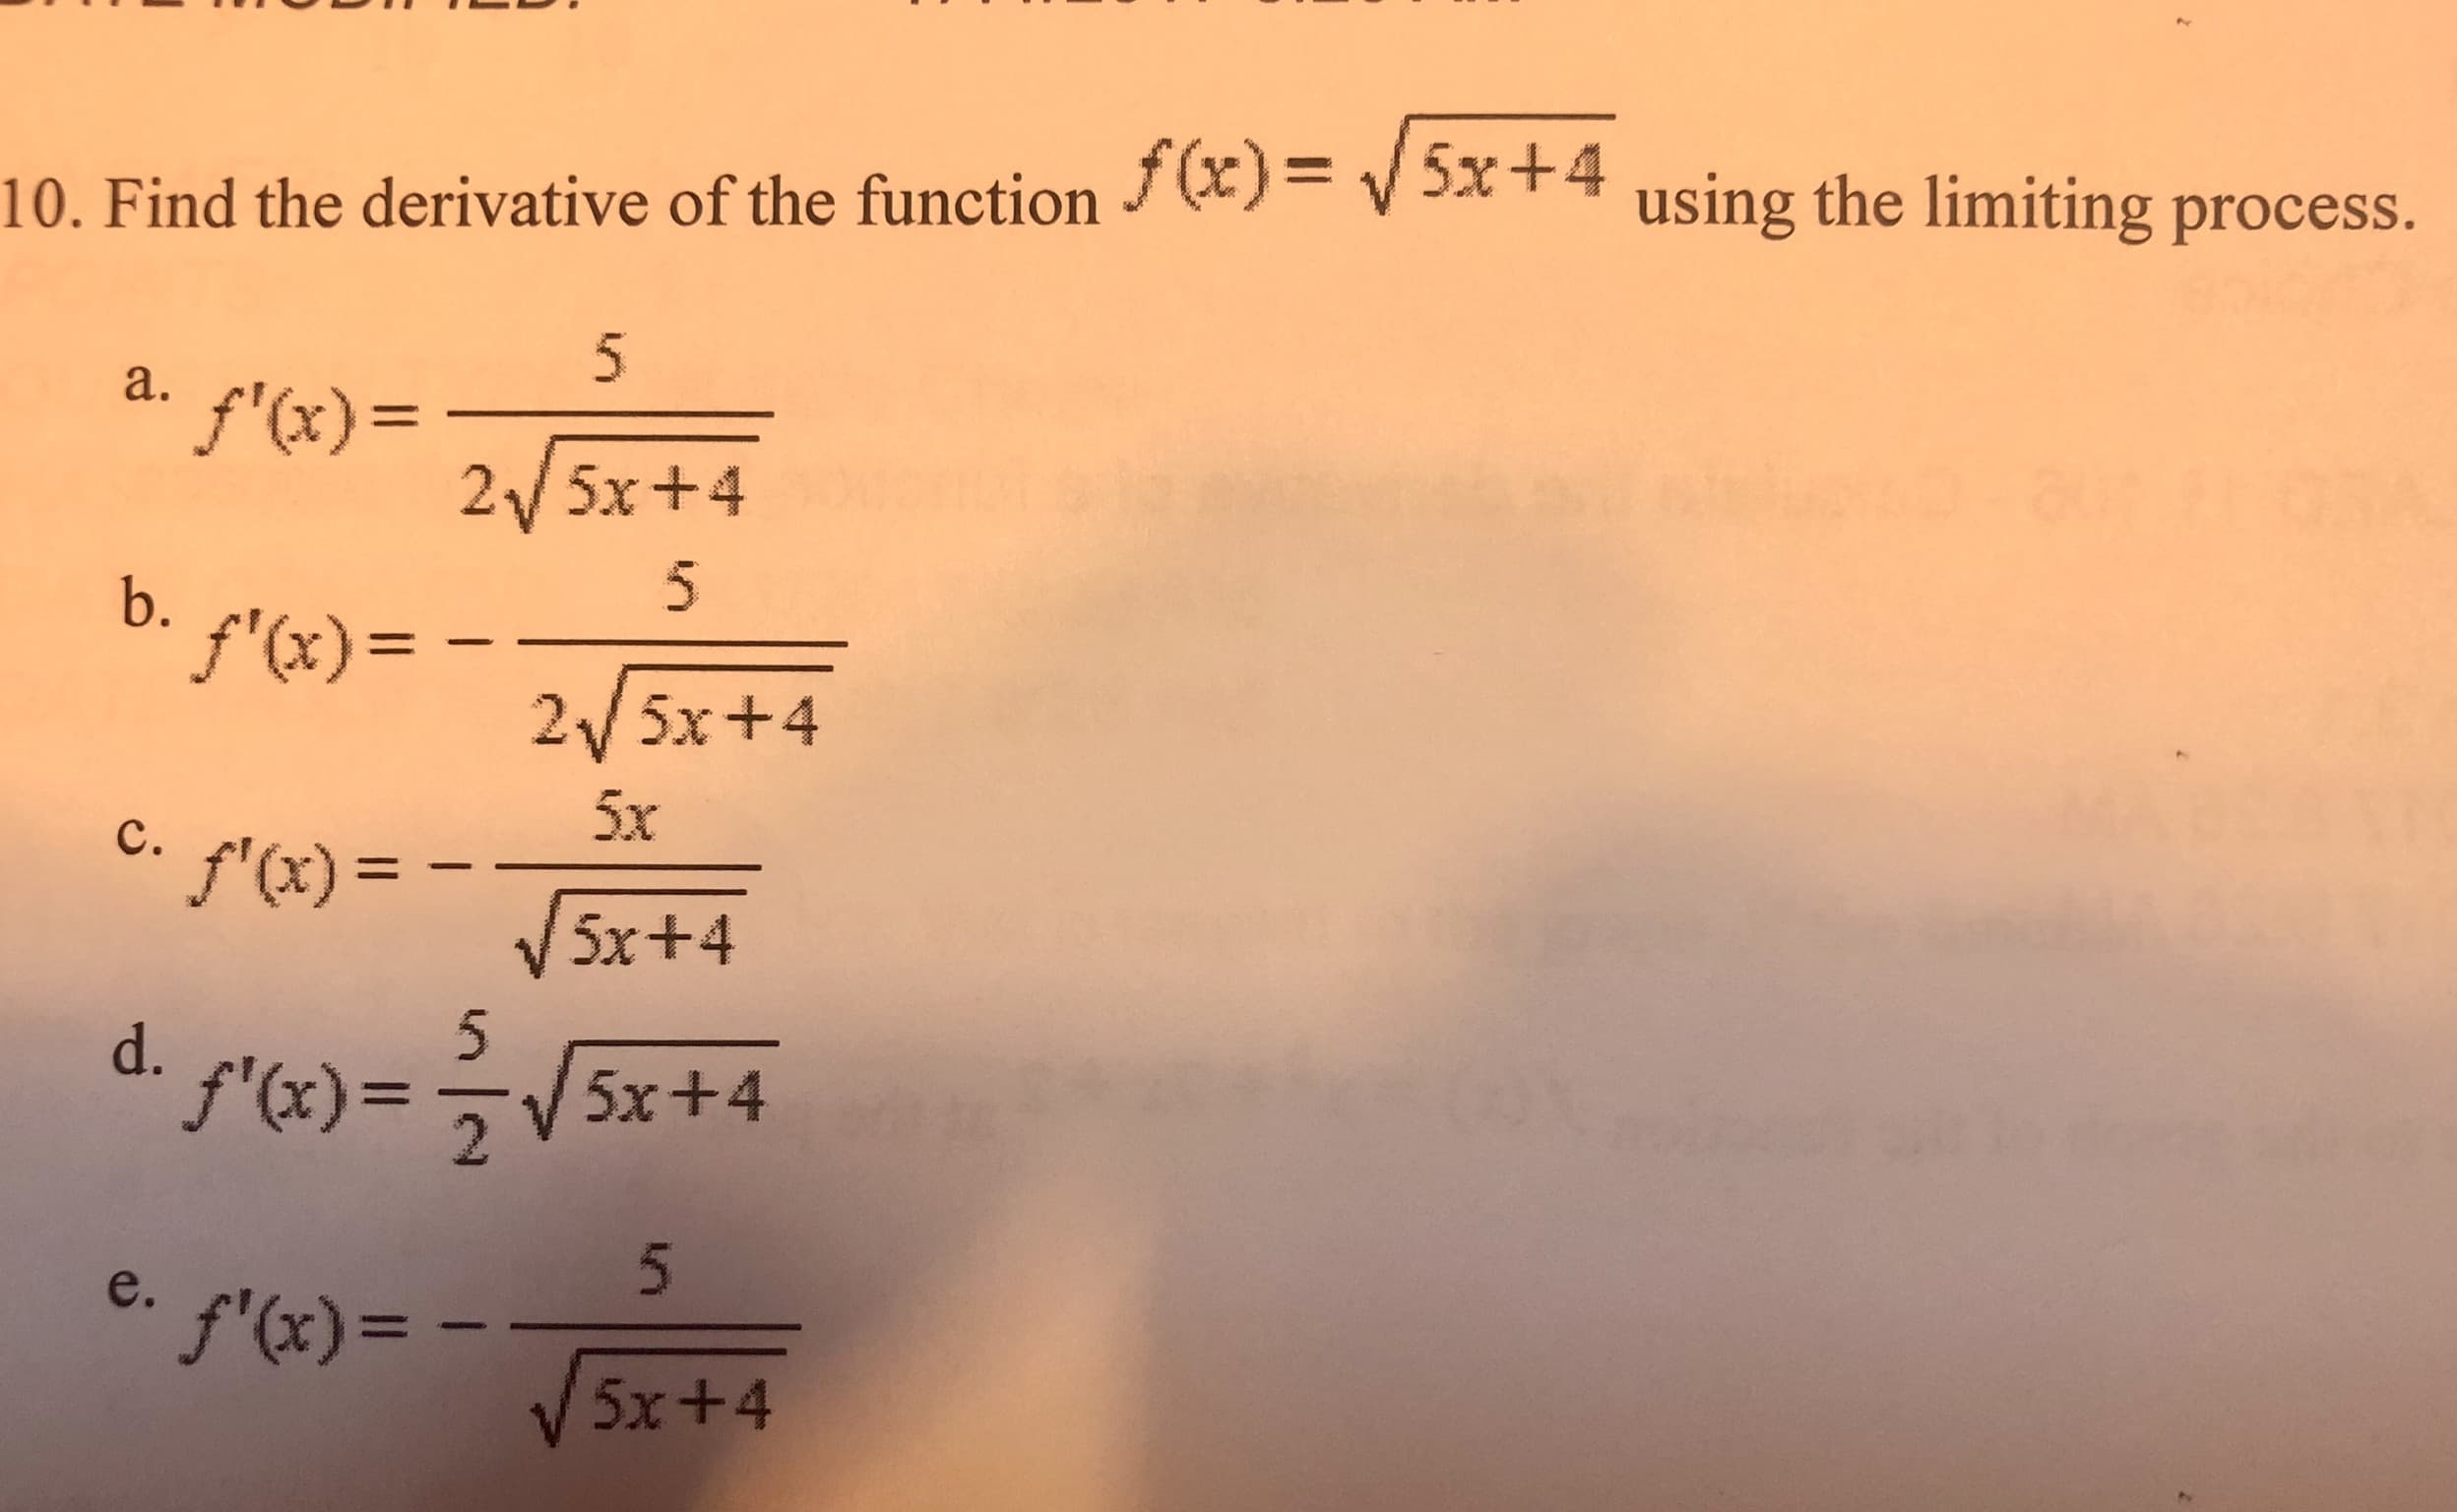 %3D
10. Find the derivative of the function )= V 5T4 using the limiting process.
